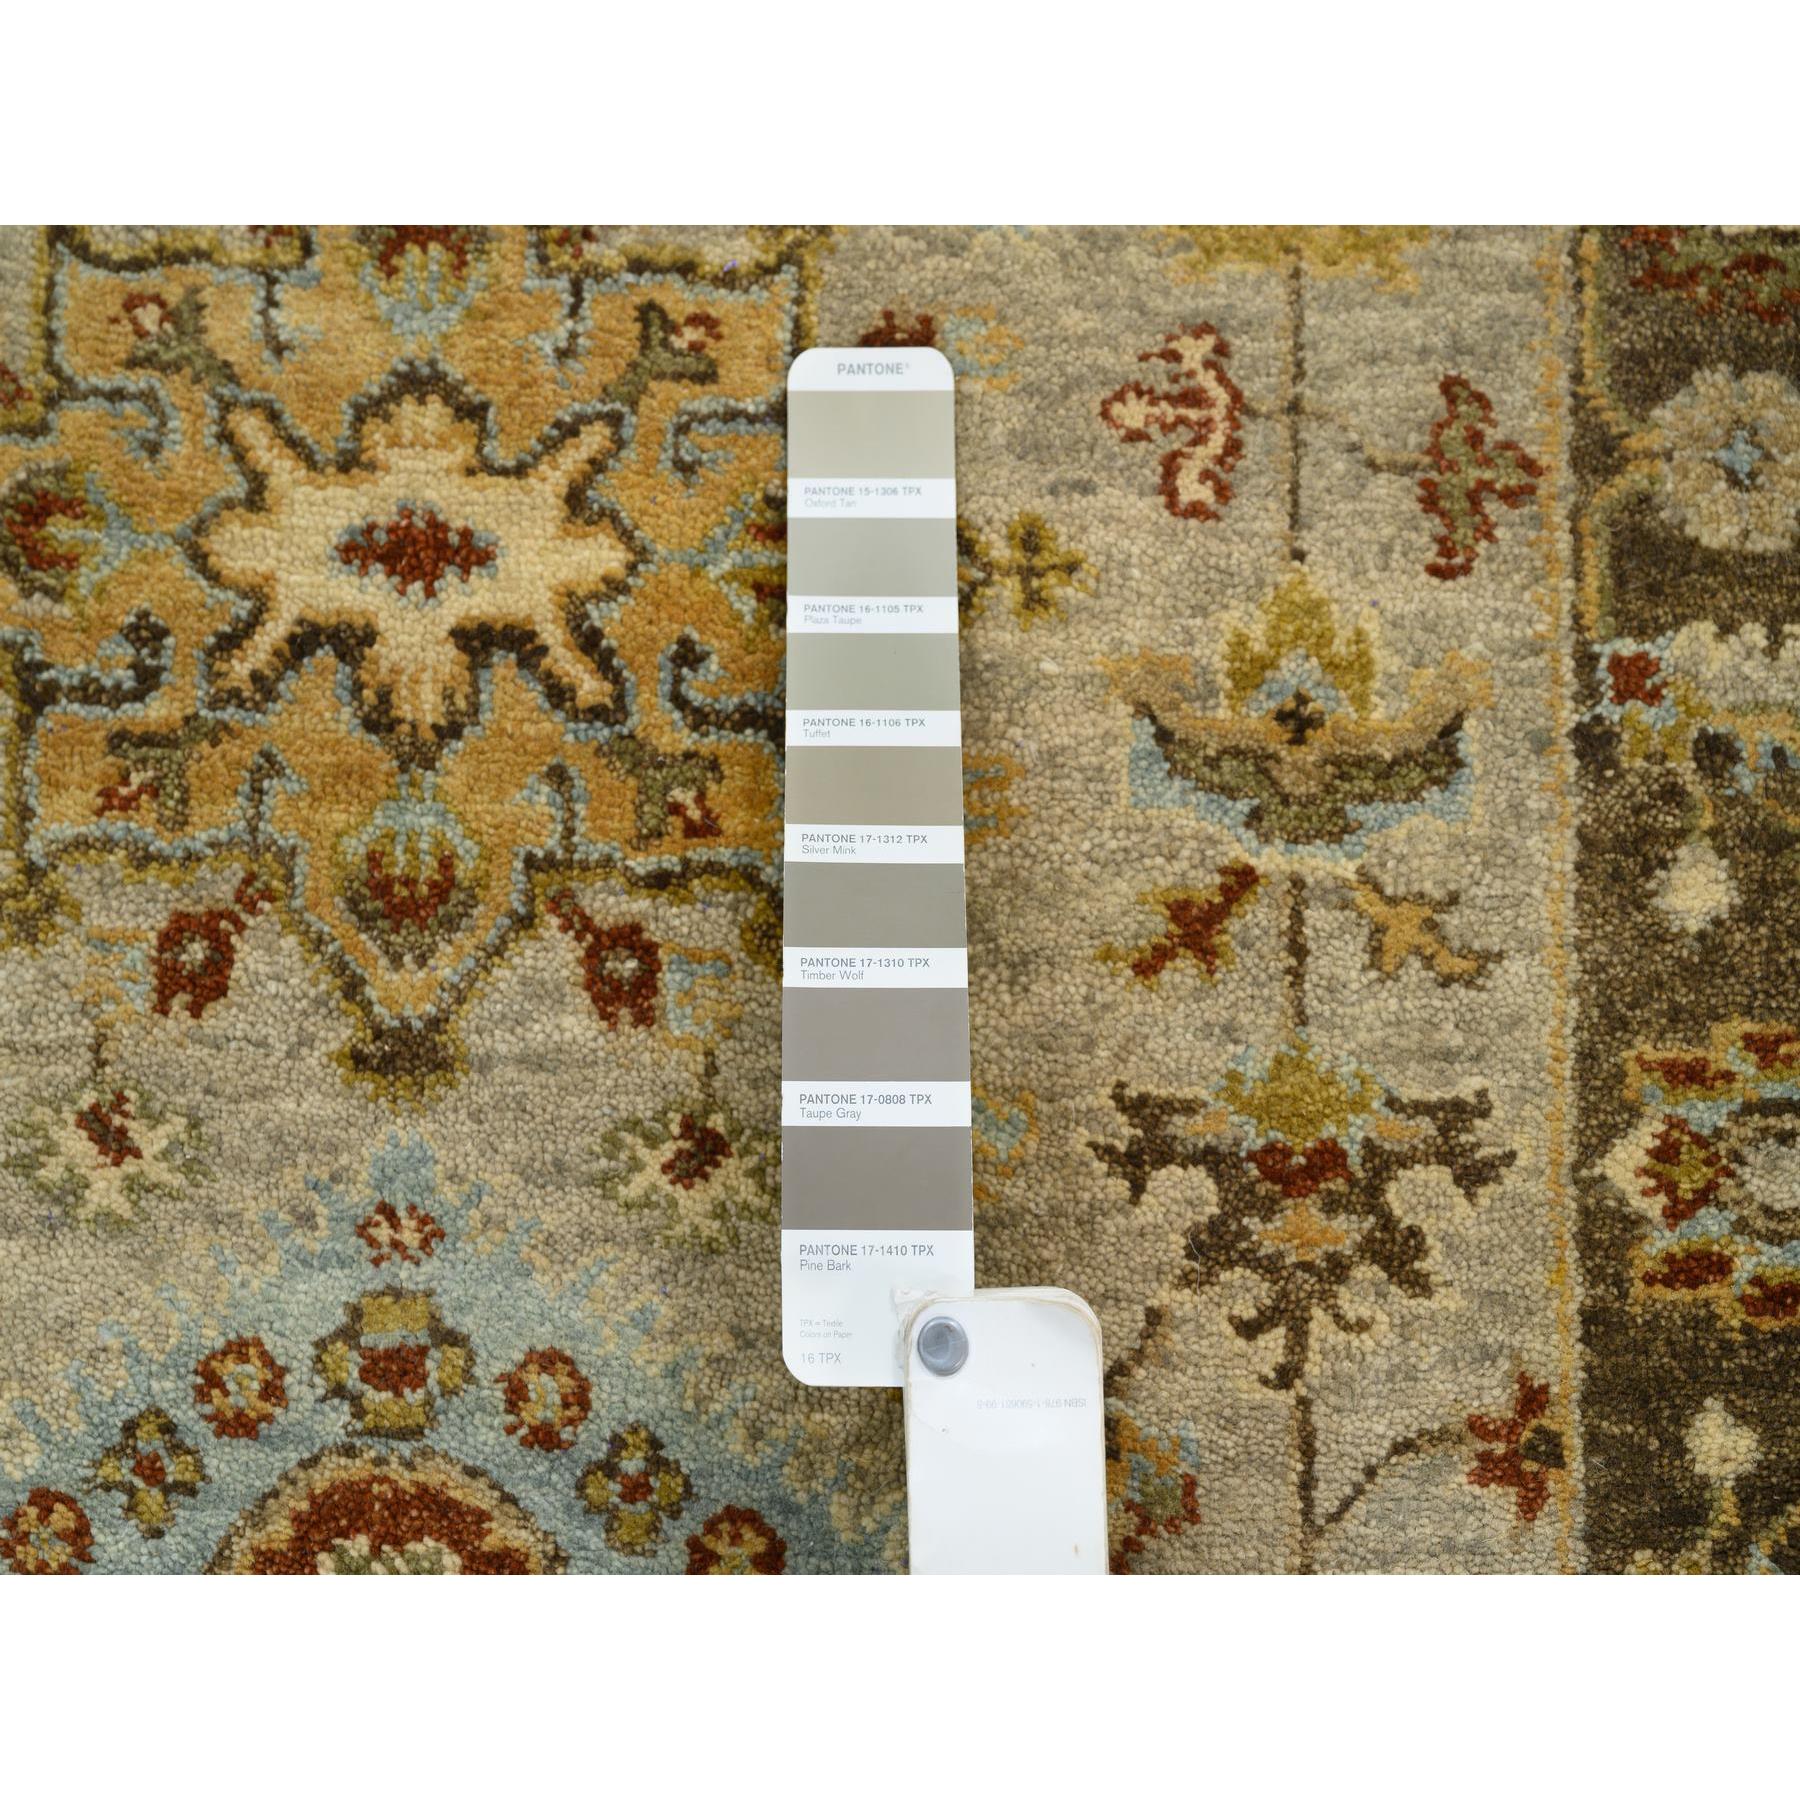 2'8"x16'1" Gray-Brown Karajeh Design with Tribal Medallions Hand Woven, Pure Wool Runner Oriental Rug 